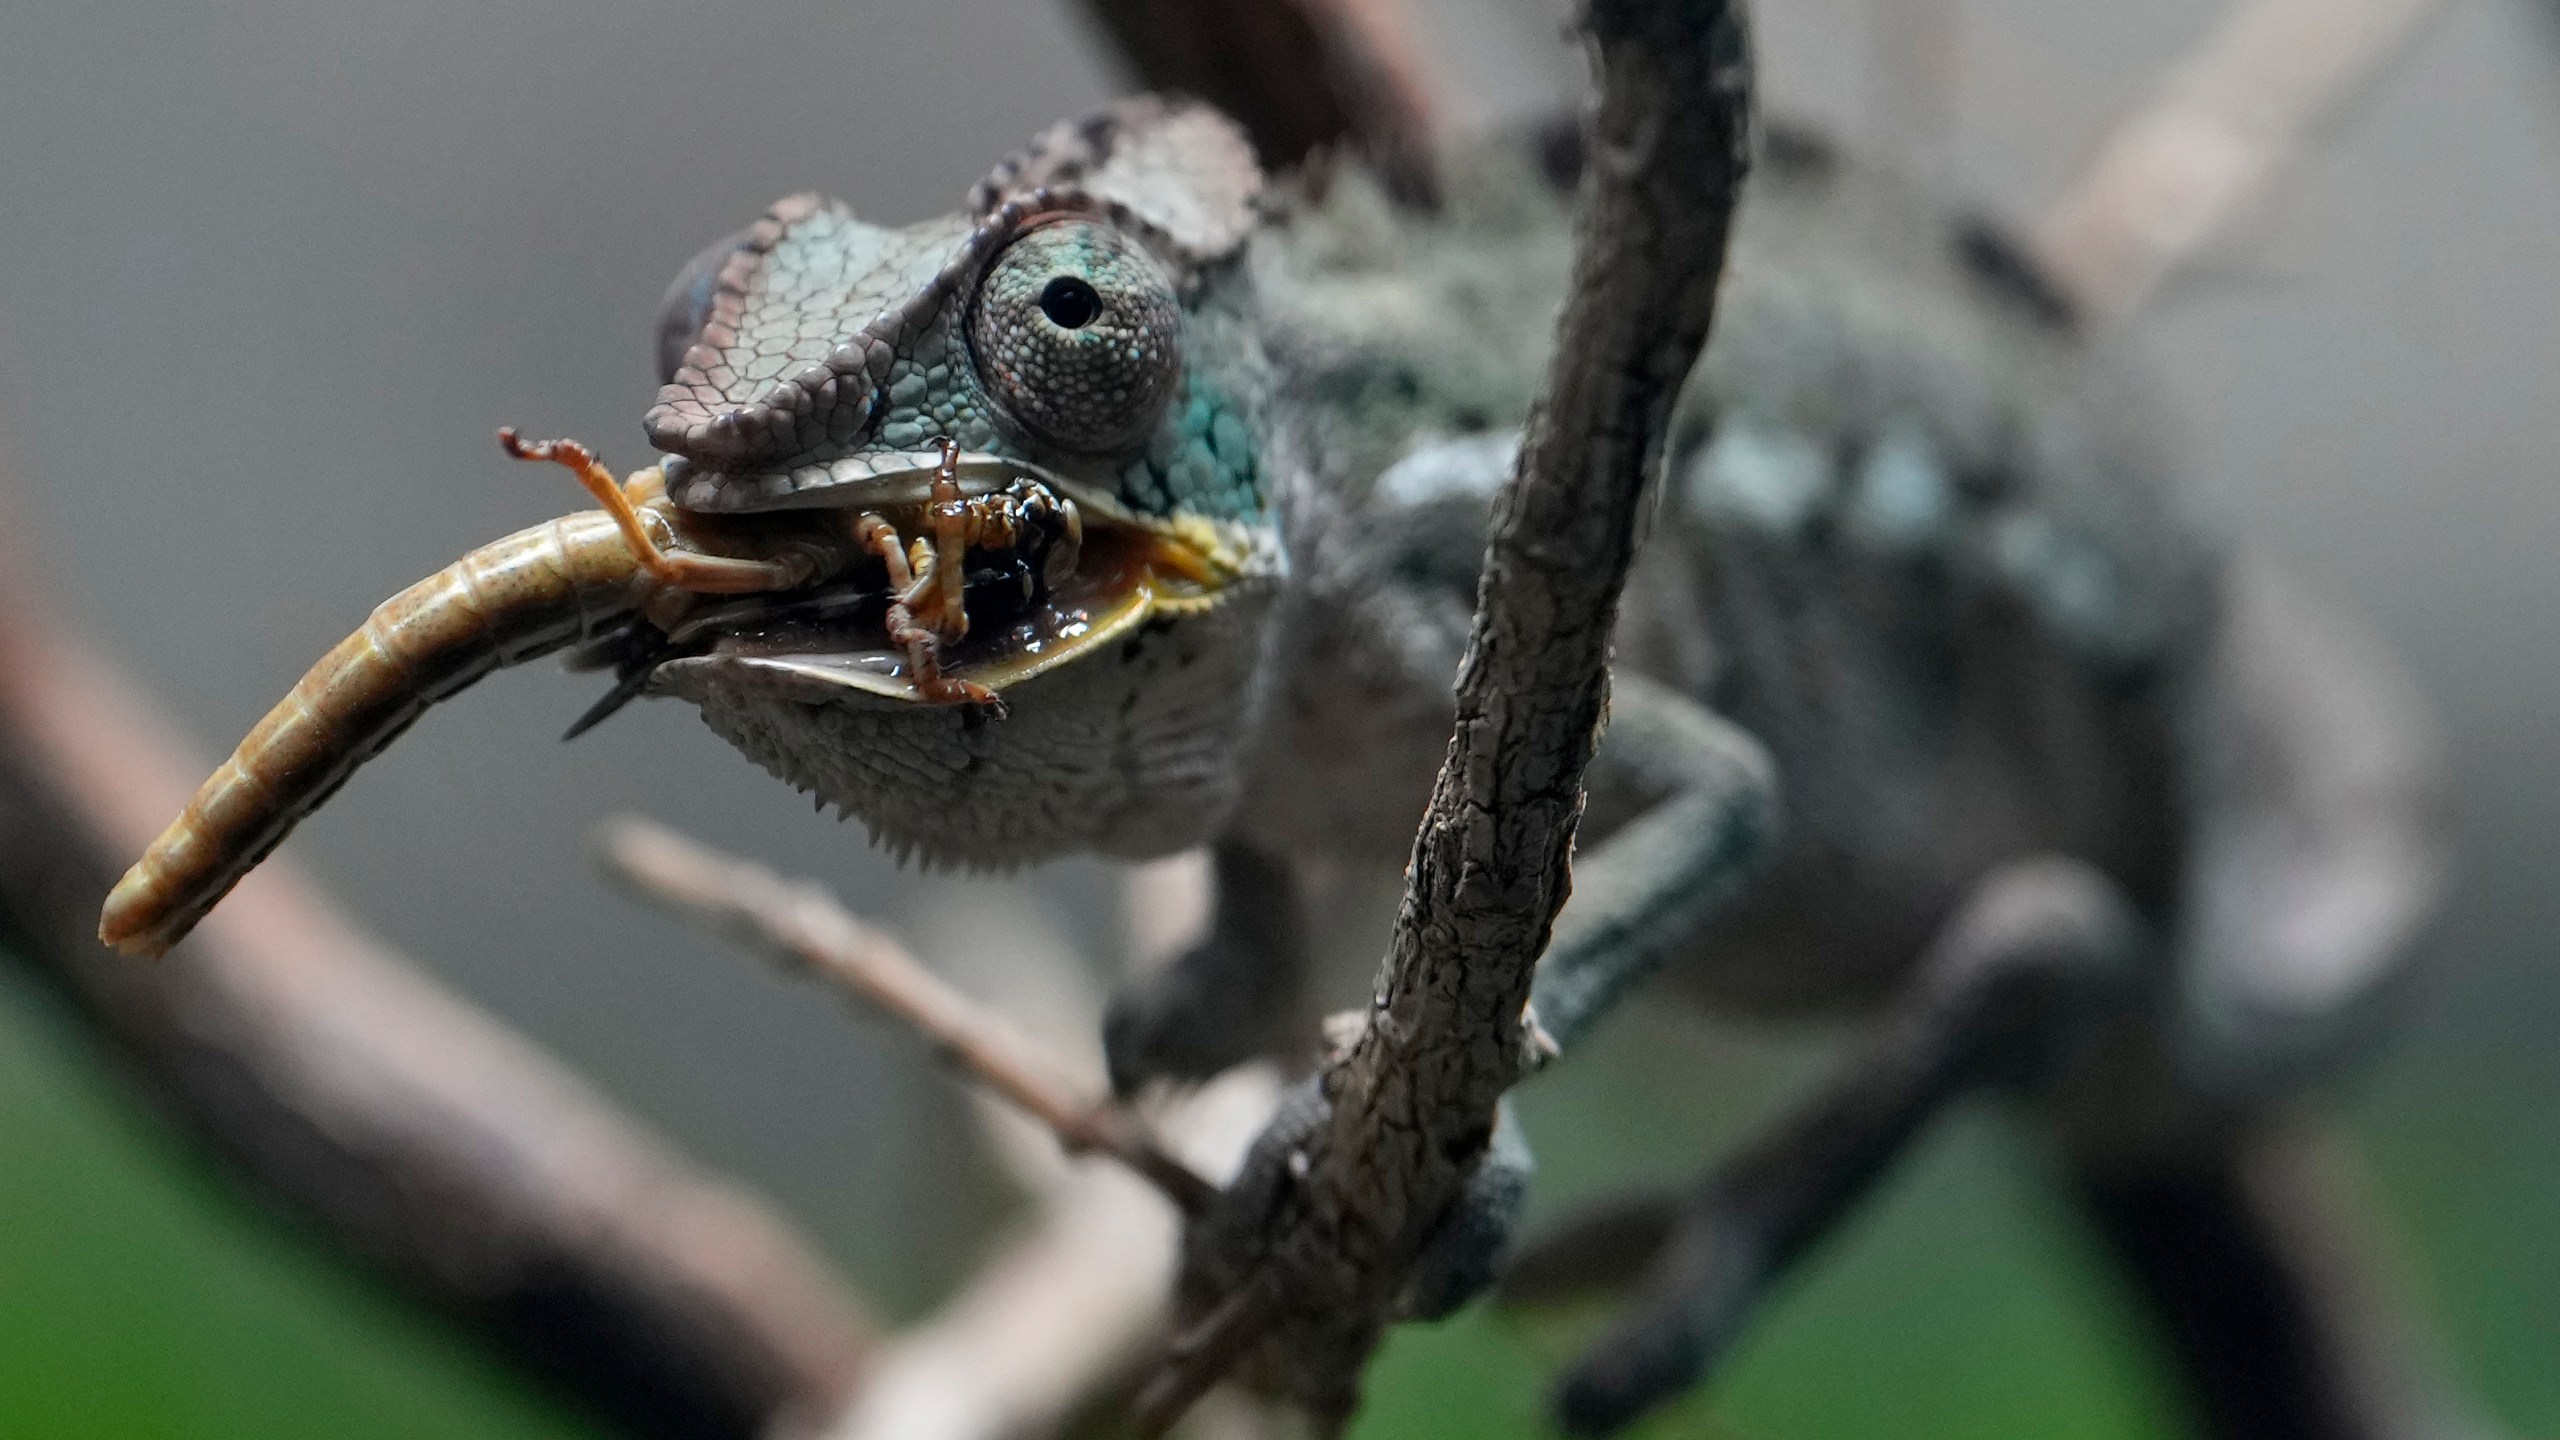 A Panther Chameleon eats an insect at London Zoo's new experience, The Secret Life of Reptiles and Amphibians ahead of its opening to the public on Friday March 29, in London, Monday, March 25, 2024. (AP Photo/Kirsty Wigglesworth)